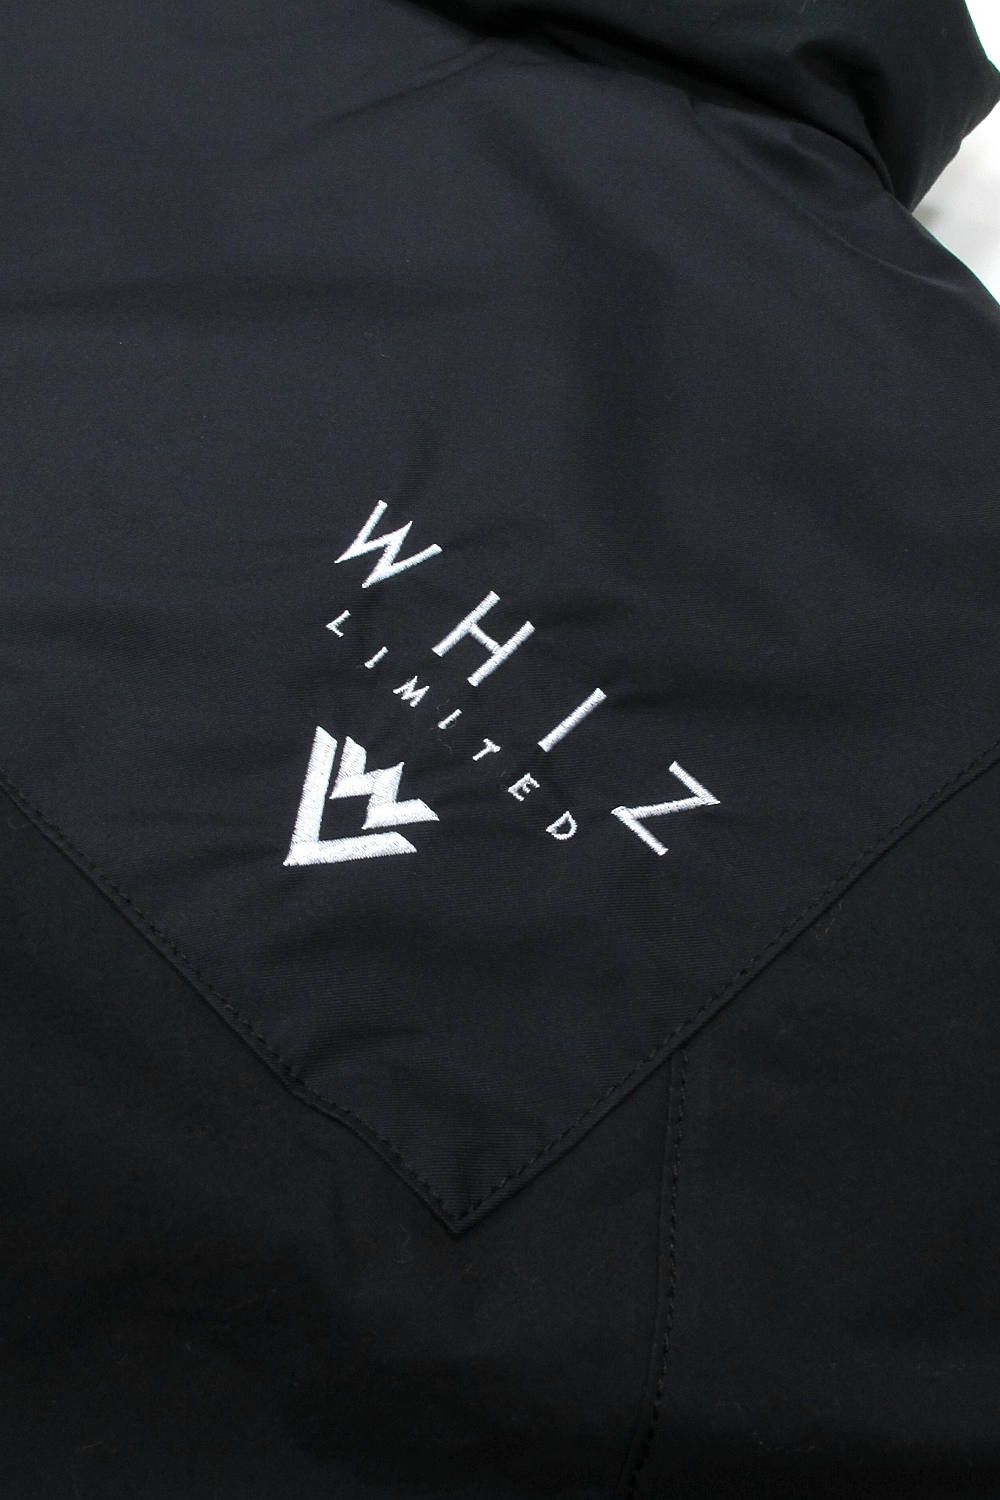 NEW ARRIVAL / WHIZ LIMITED-DAS DOWN JACKET | LOOPHOLE